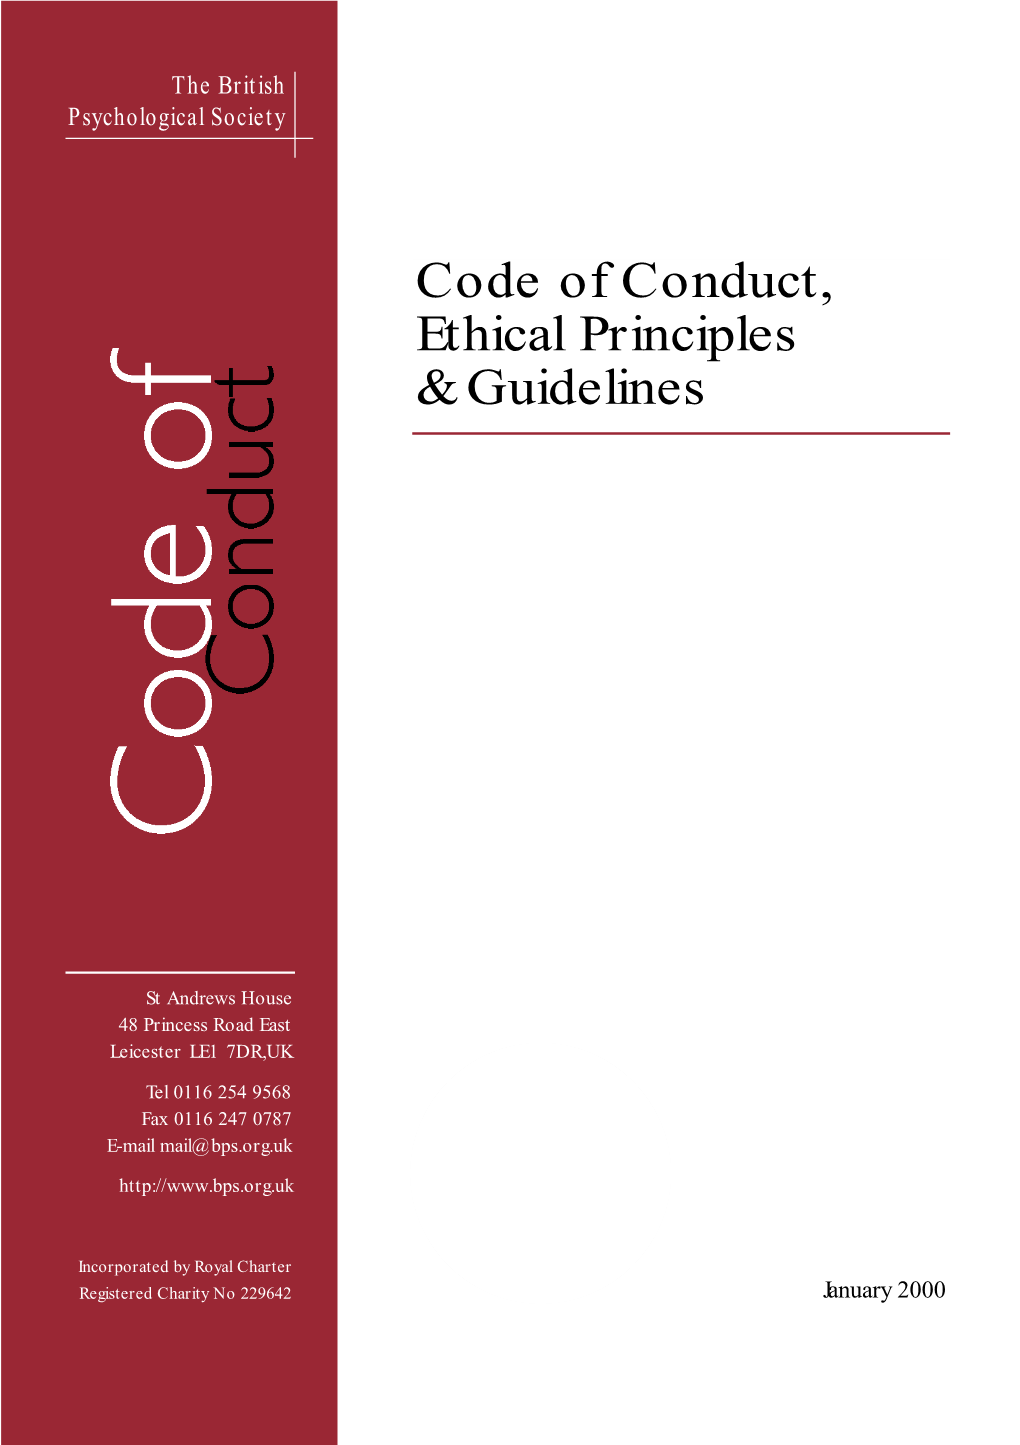 Code of Conduct, Ethical Principles & Guidelines